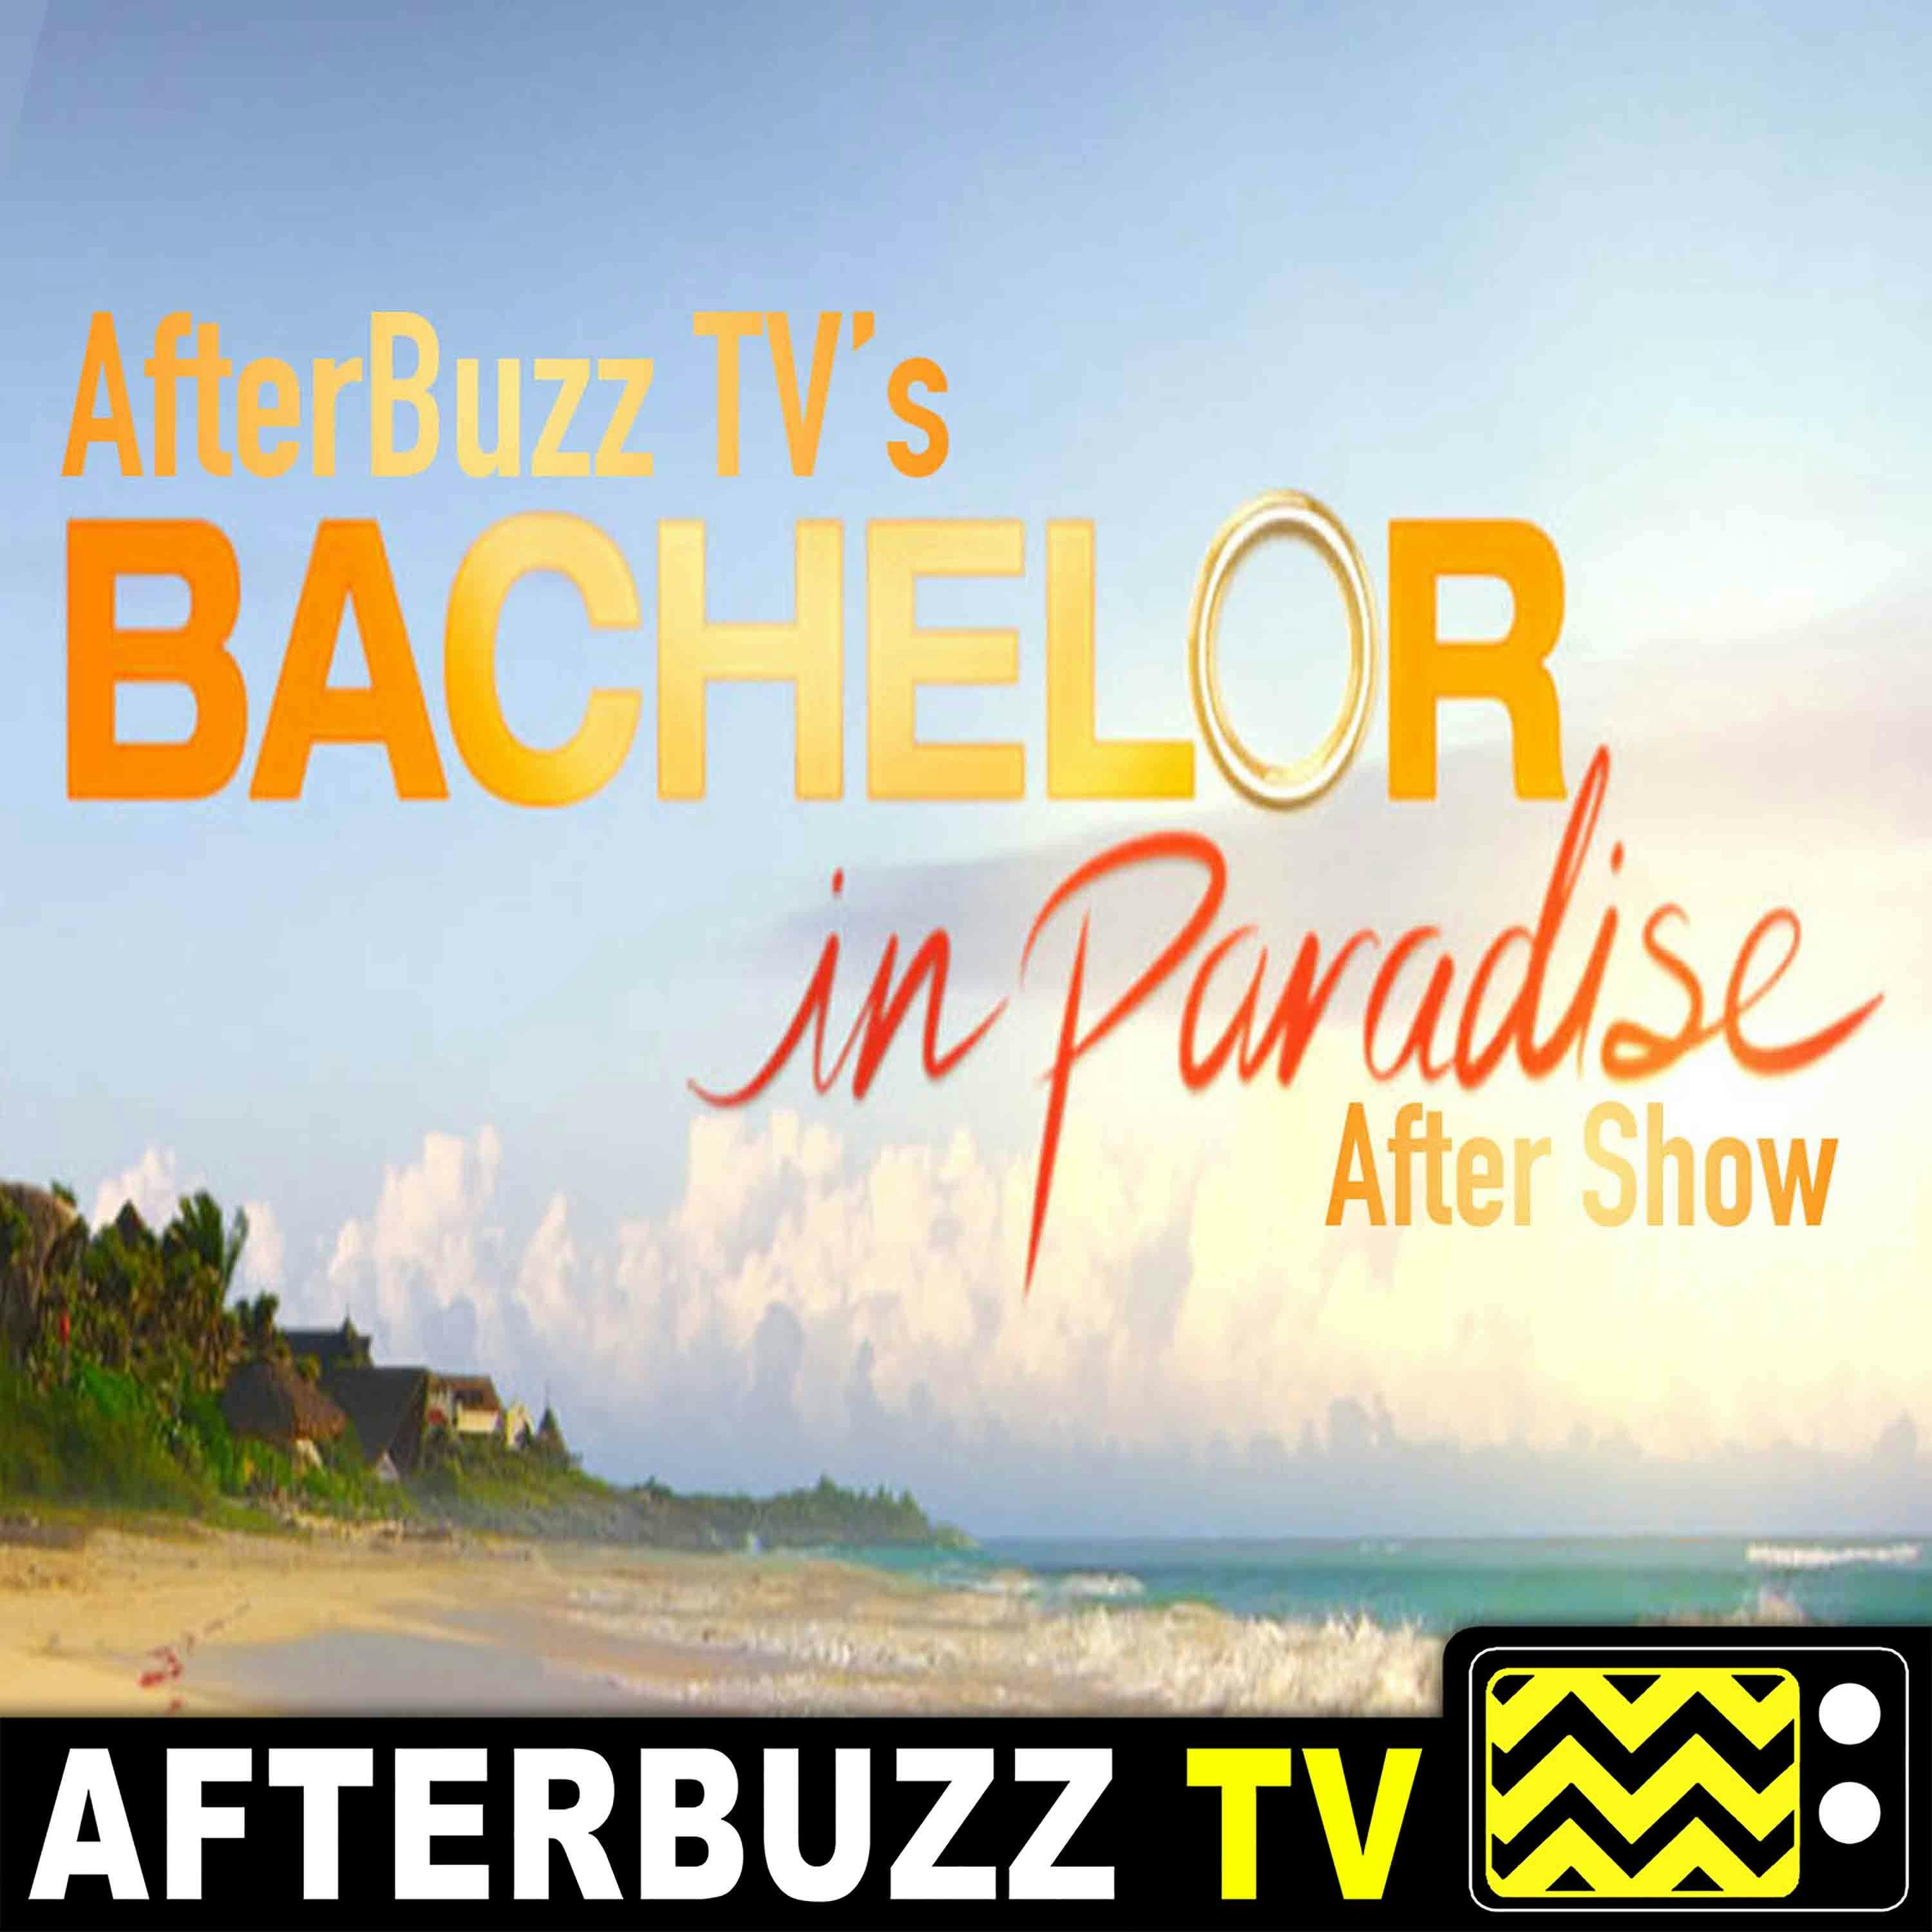 Bachelor In Paradise S:4 | Episodes 9 & 10 | AfterBuzz TV AfterShow